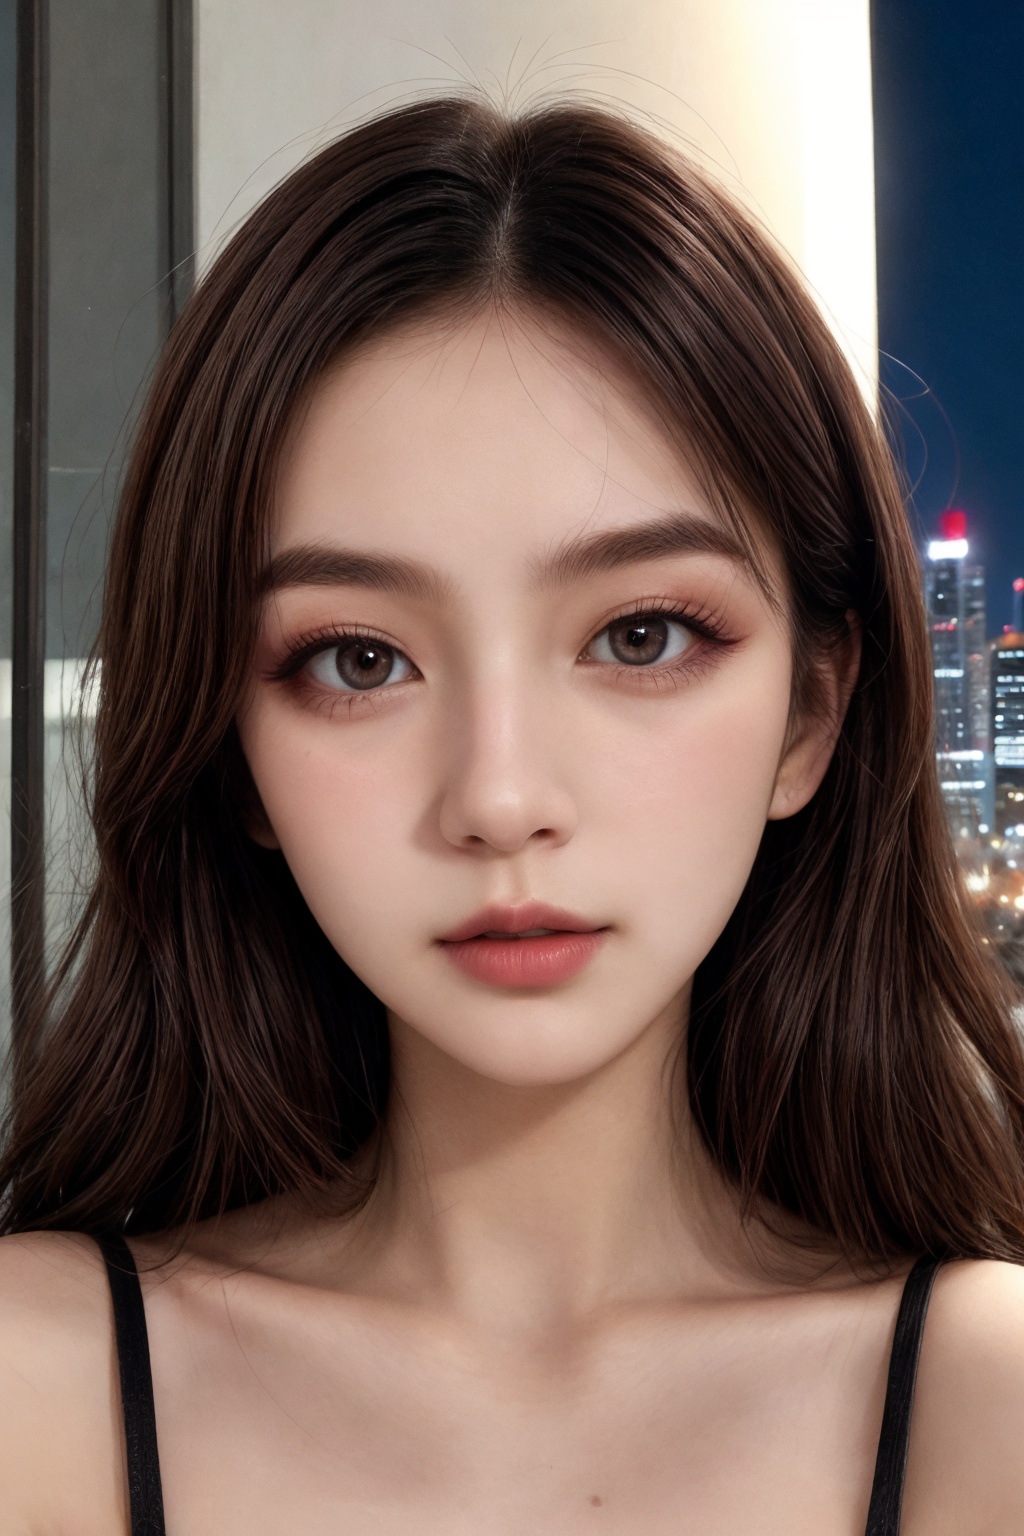 instagram photo, closeup face photo of 18 y.o woman in dress, beautiful face, makeup, night city street,